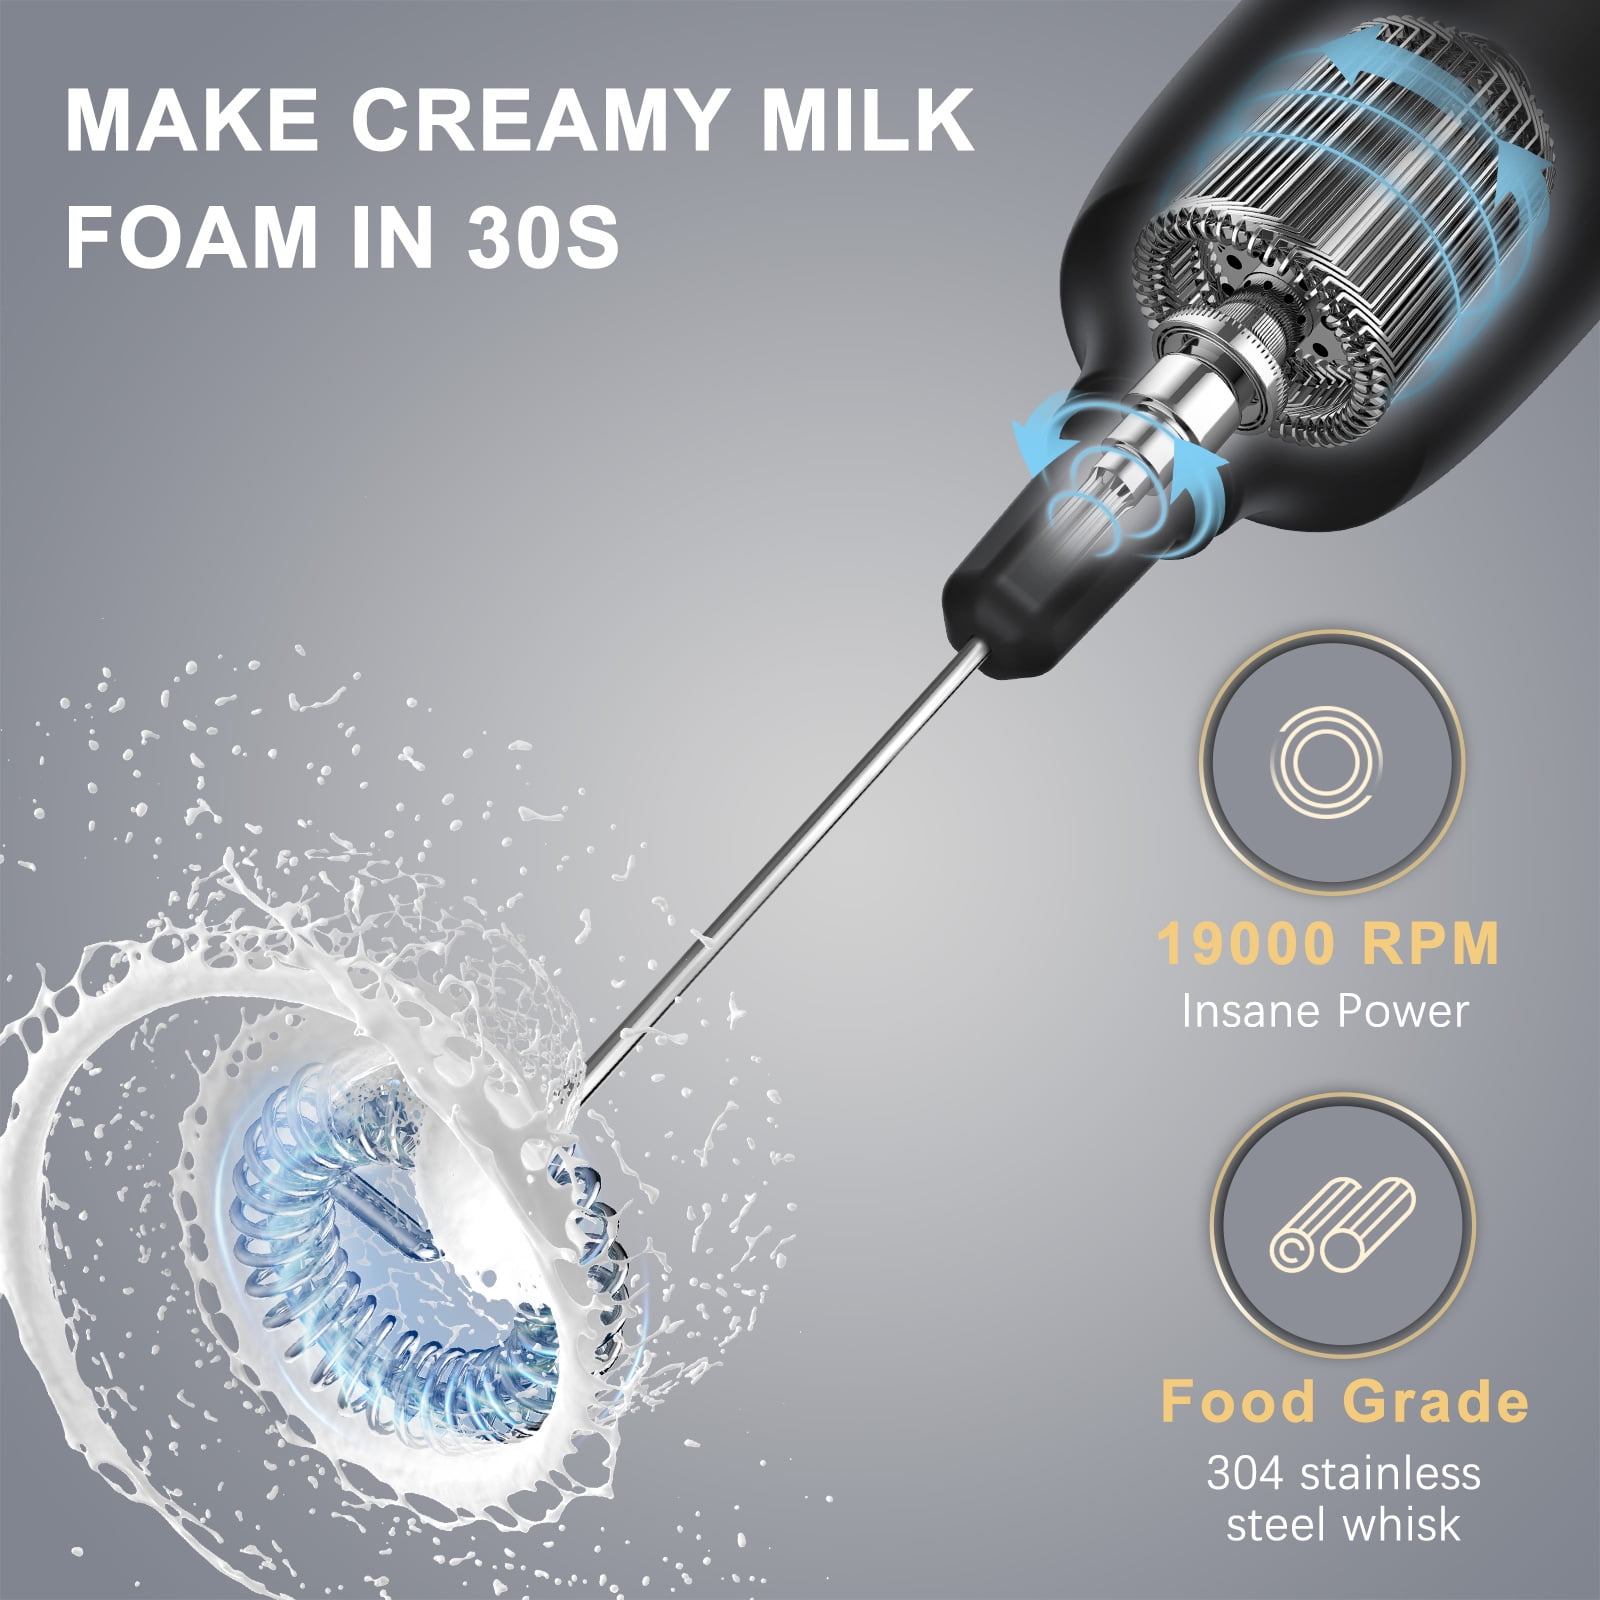 HadinEEon Milk Frother Handheld, … curated on LTK